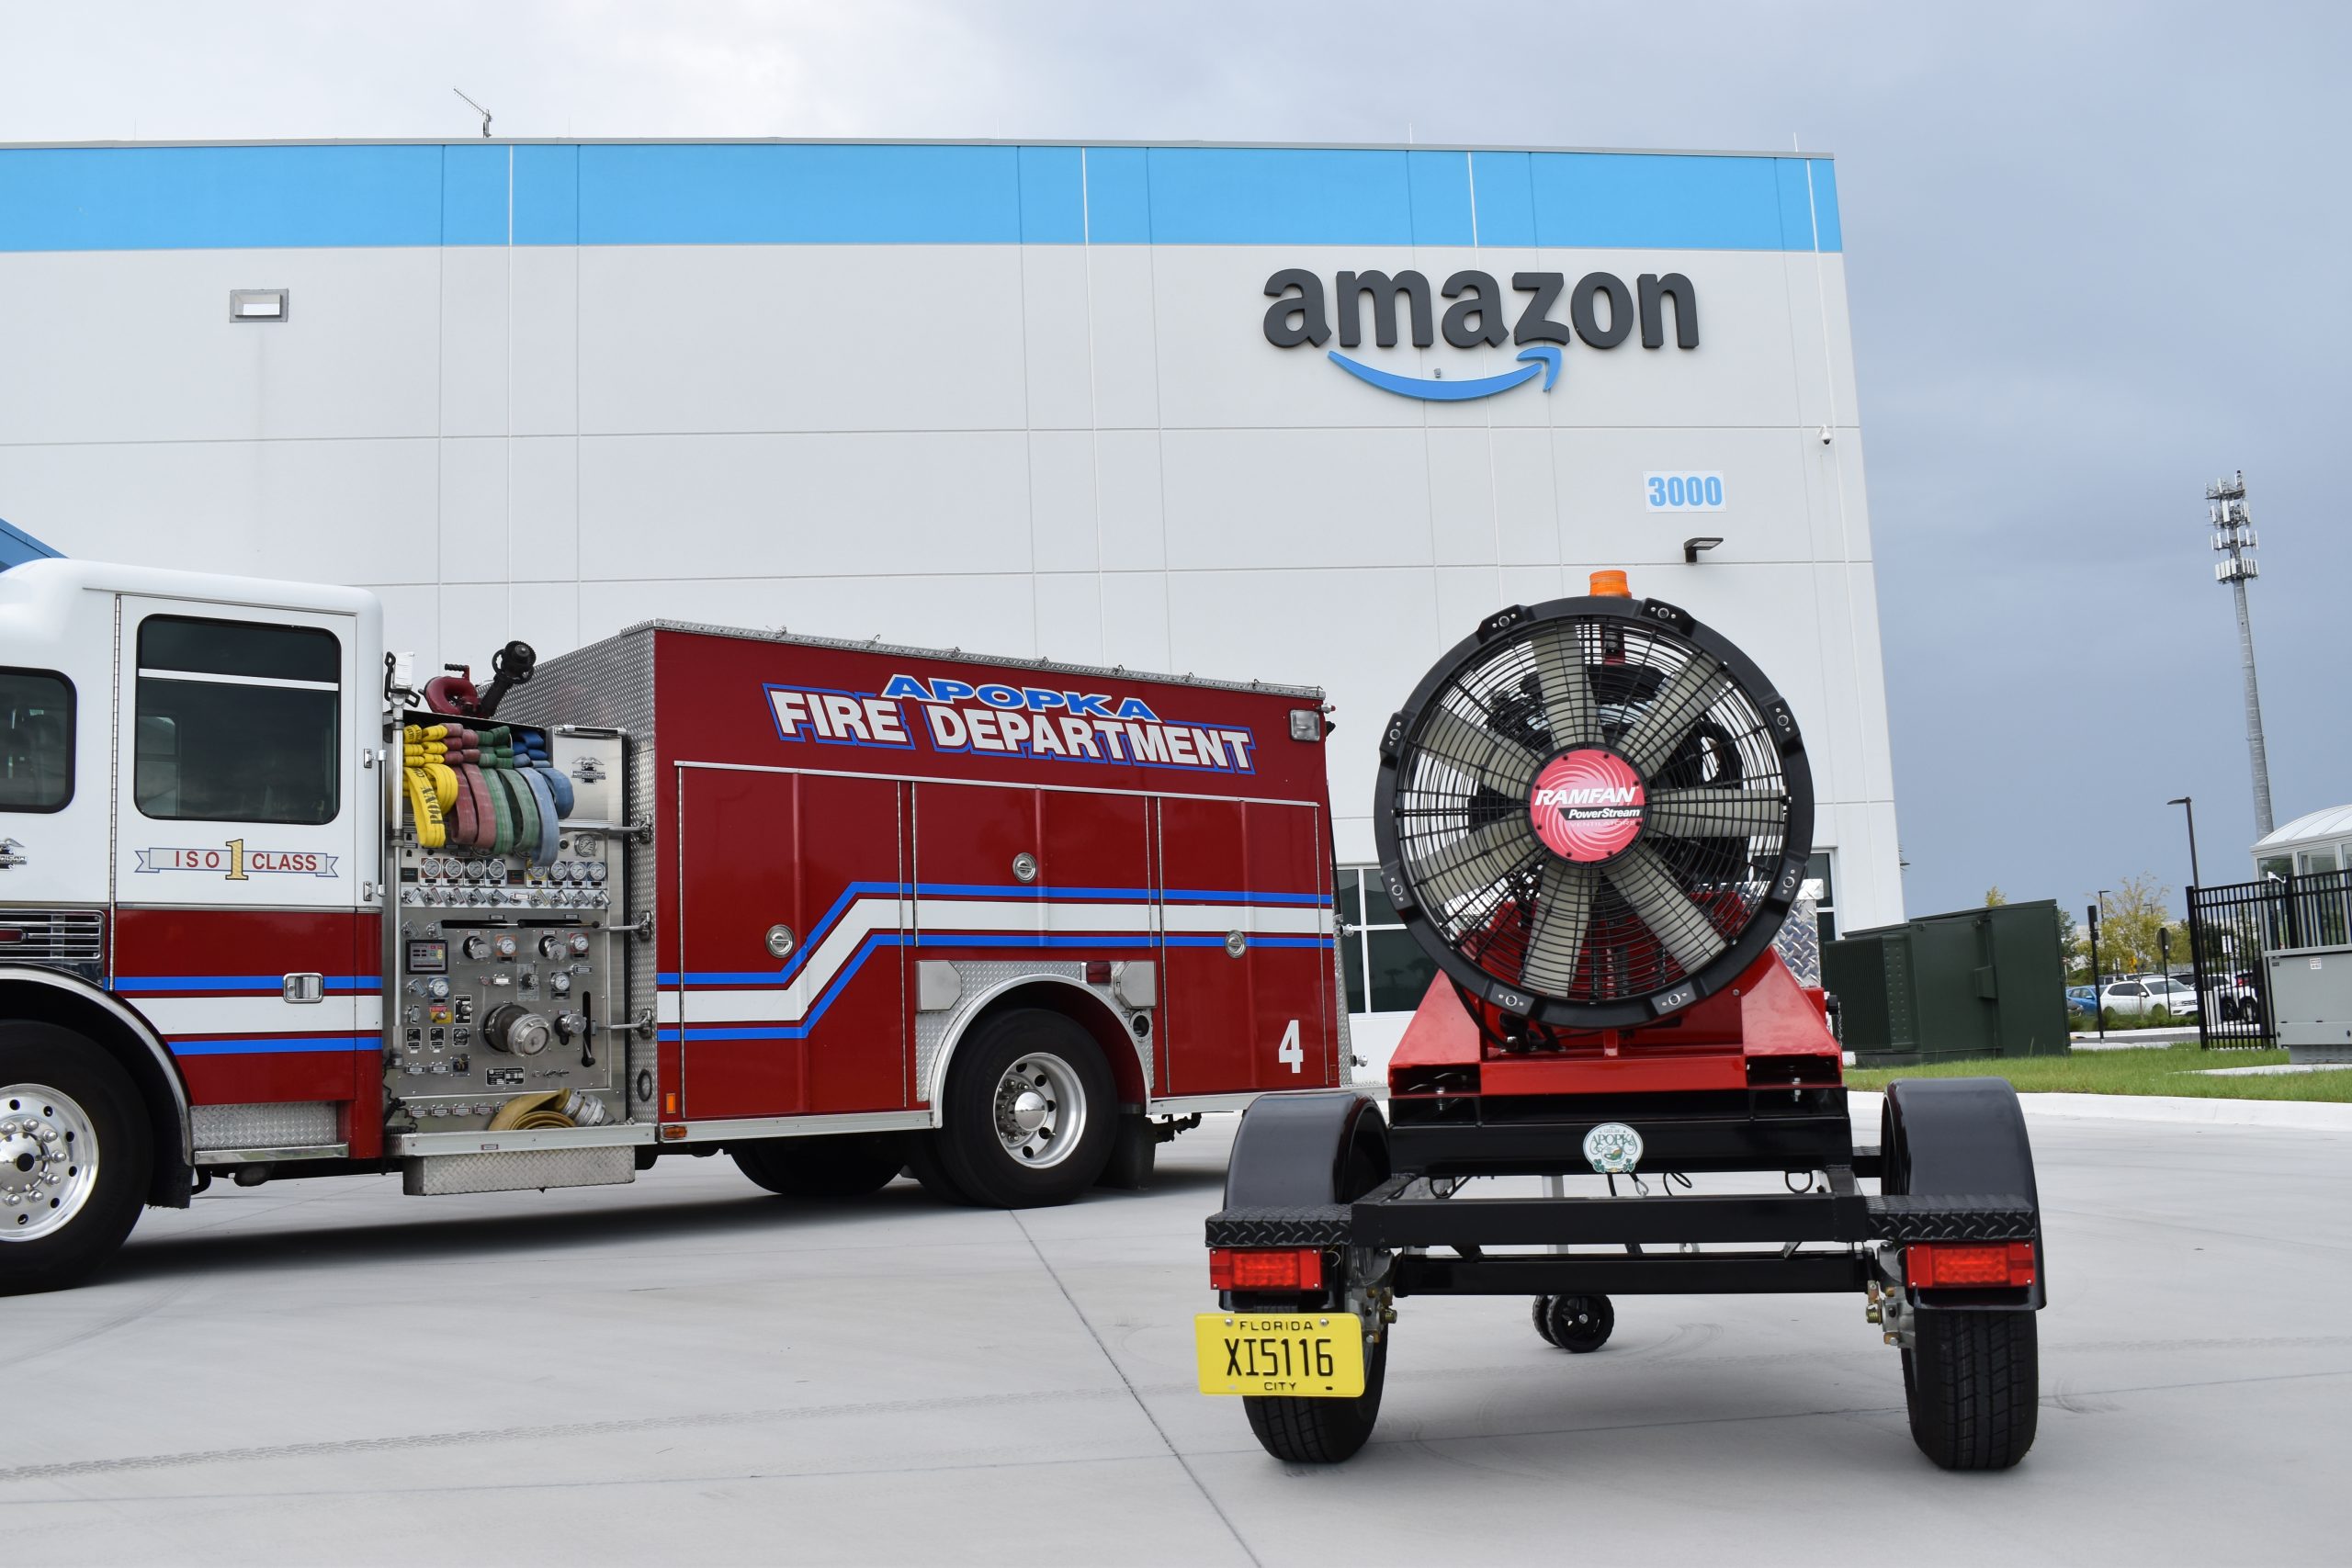 Preparing for the worst: How a community fire department upgrades its fleet when Amazon moves in